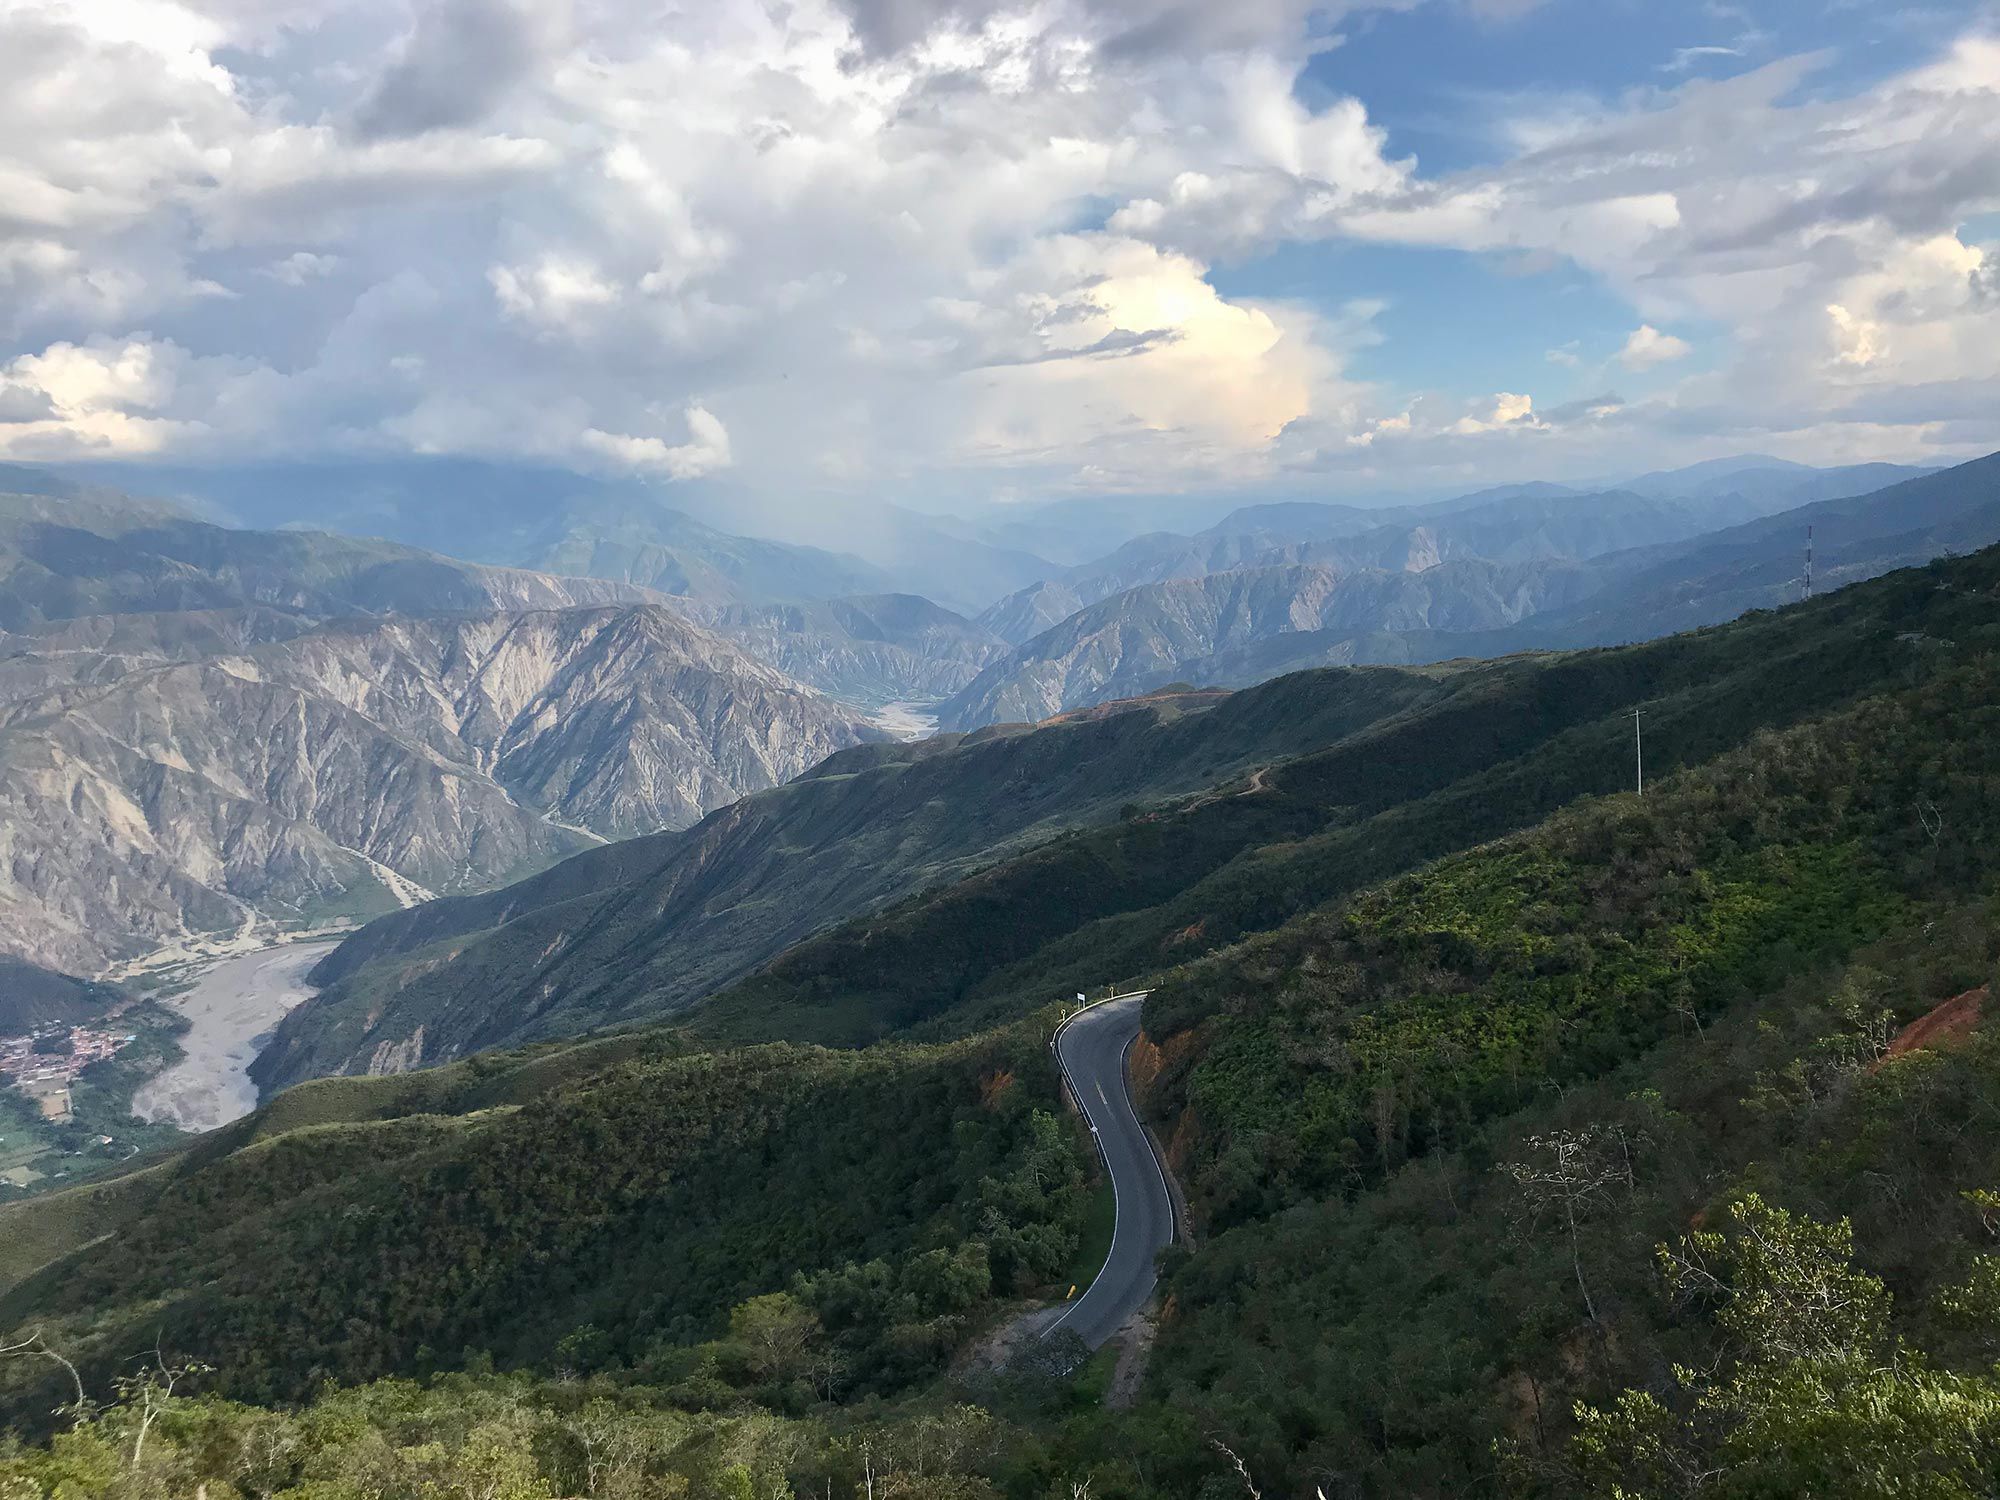 No shortage of fast corners and steep switchbacks on the beloved Chicamocha Canyon highway.